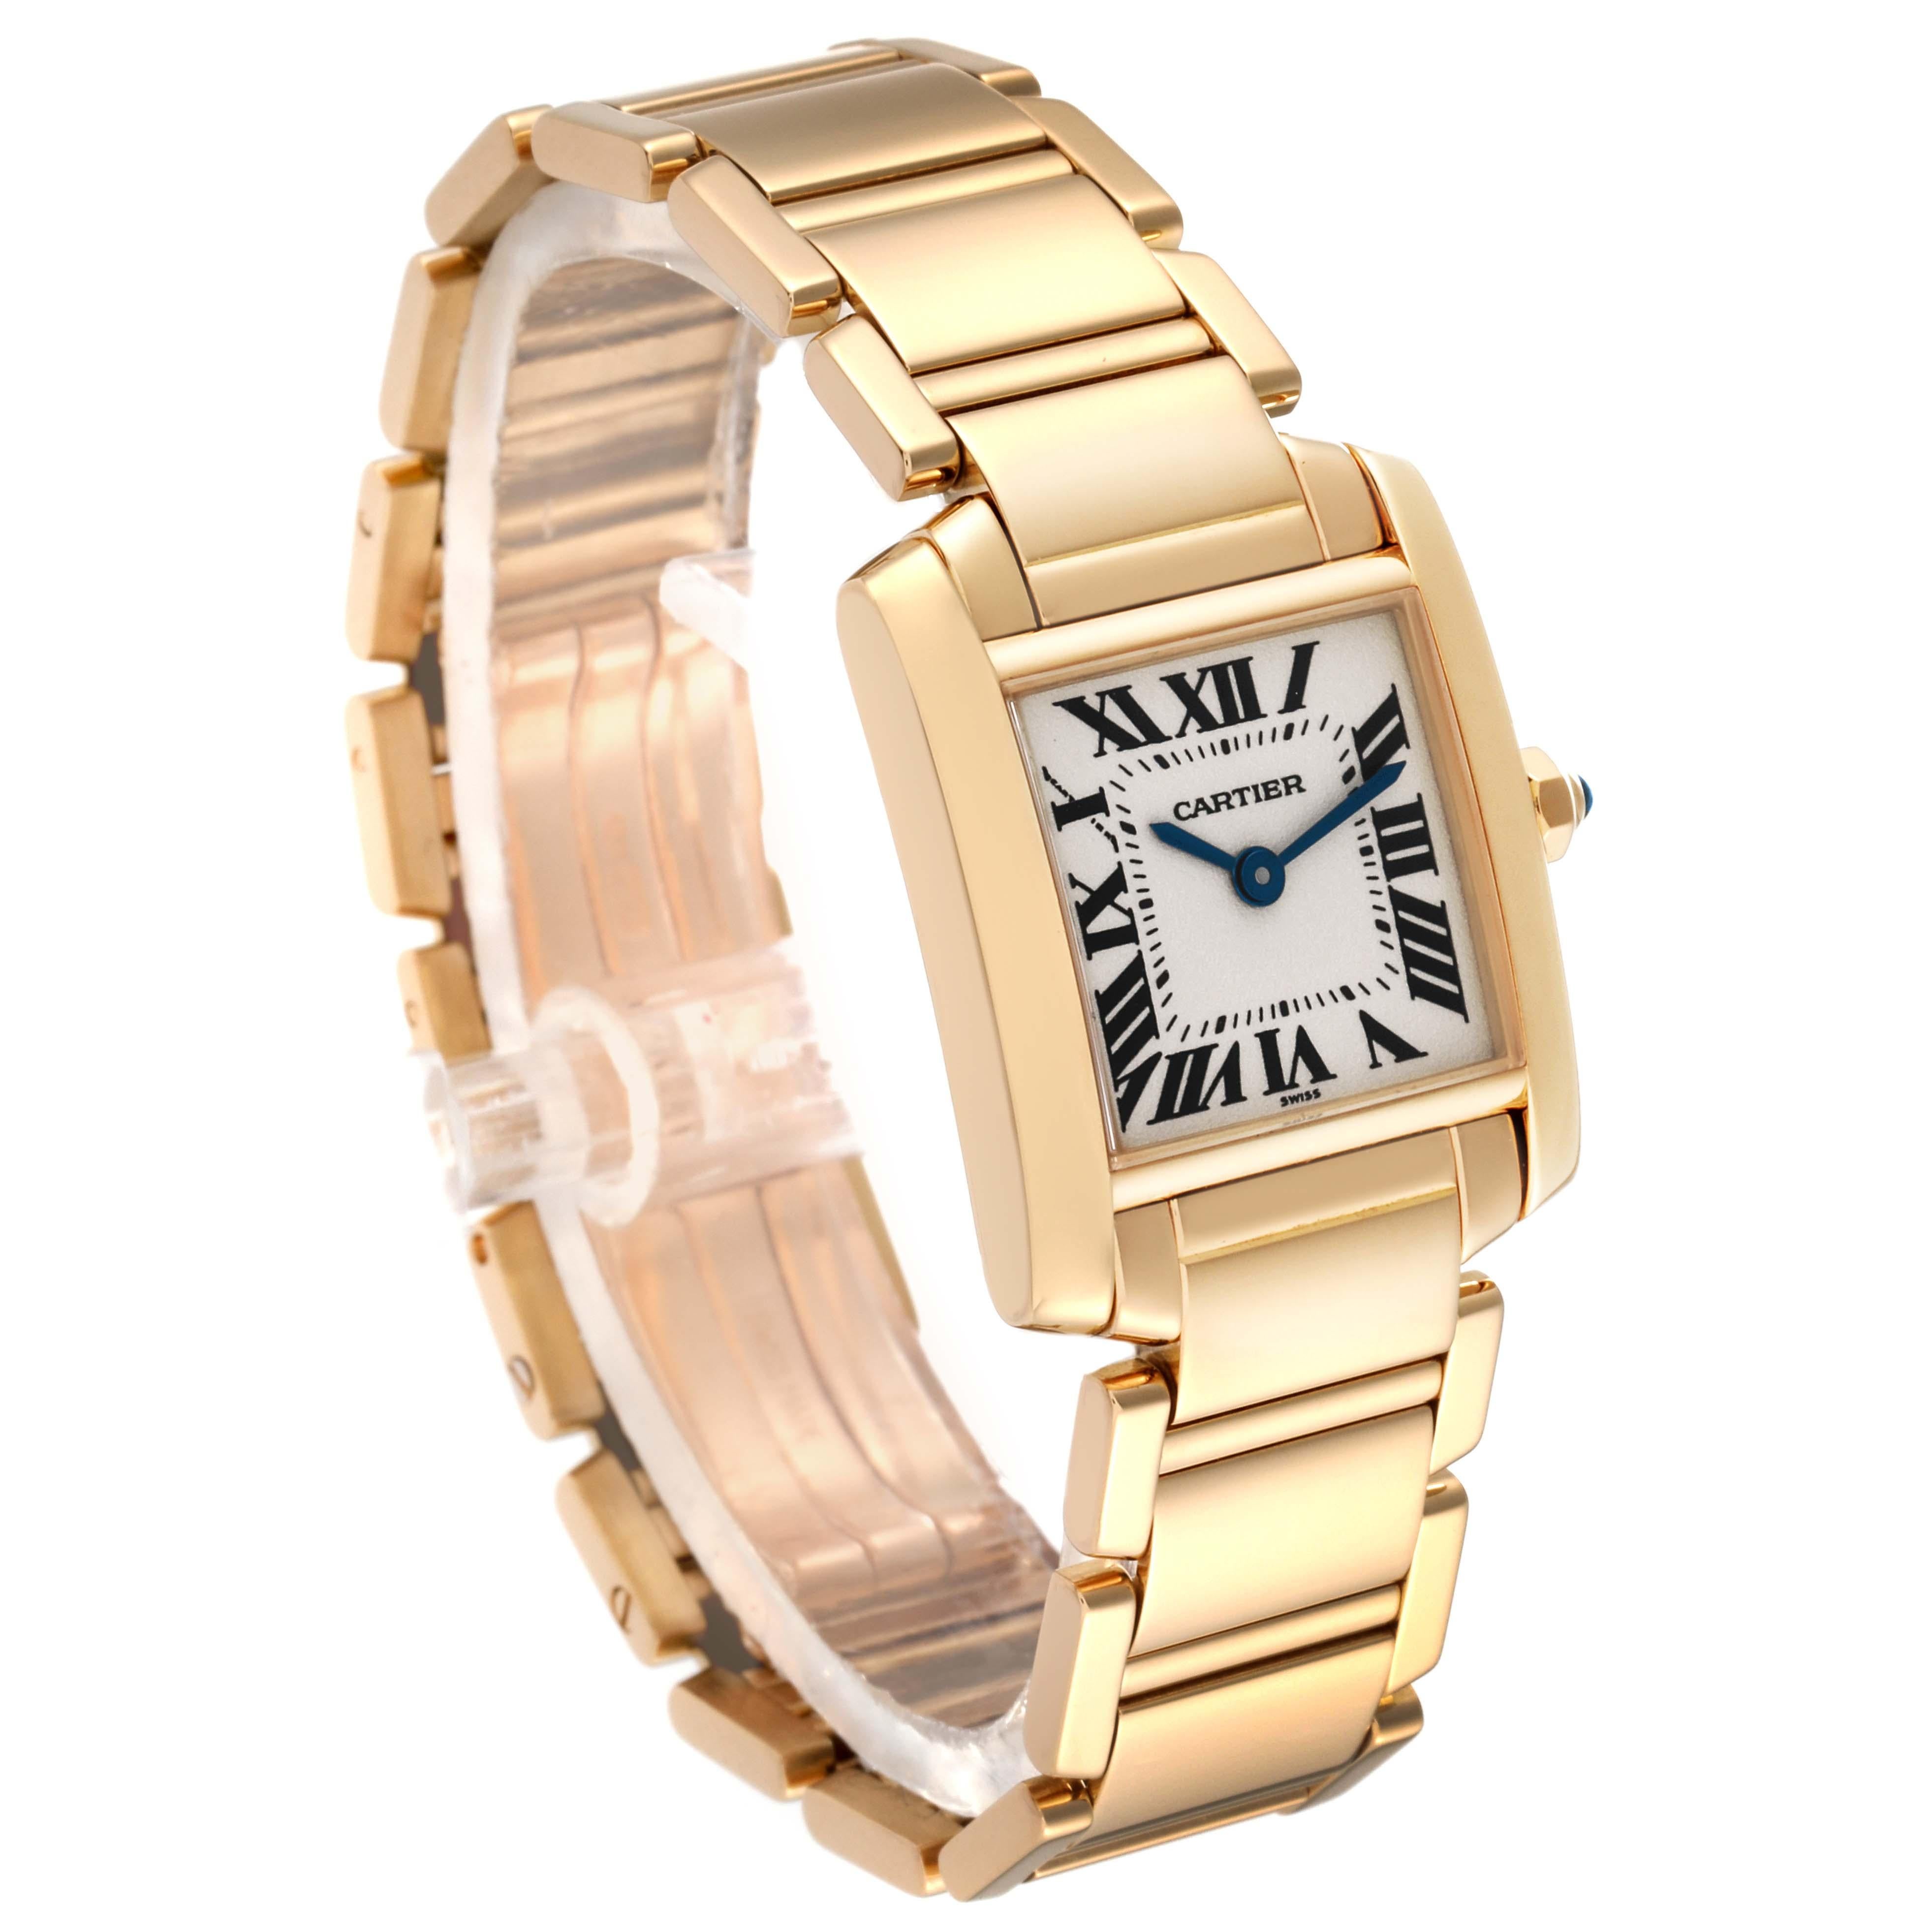 Cartier Tank Francaise Yellow Gold Quartz Ladies Watch W50002N2 In Excellent Condition For Sale In Atlanta, GA